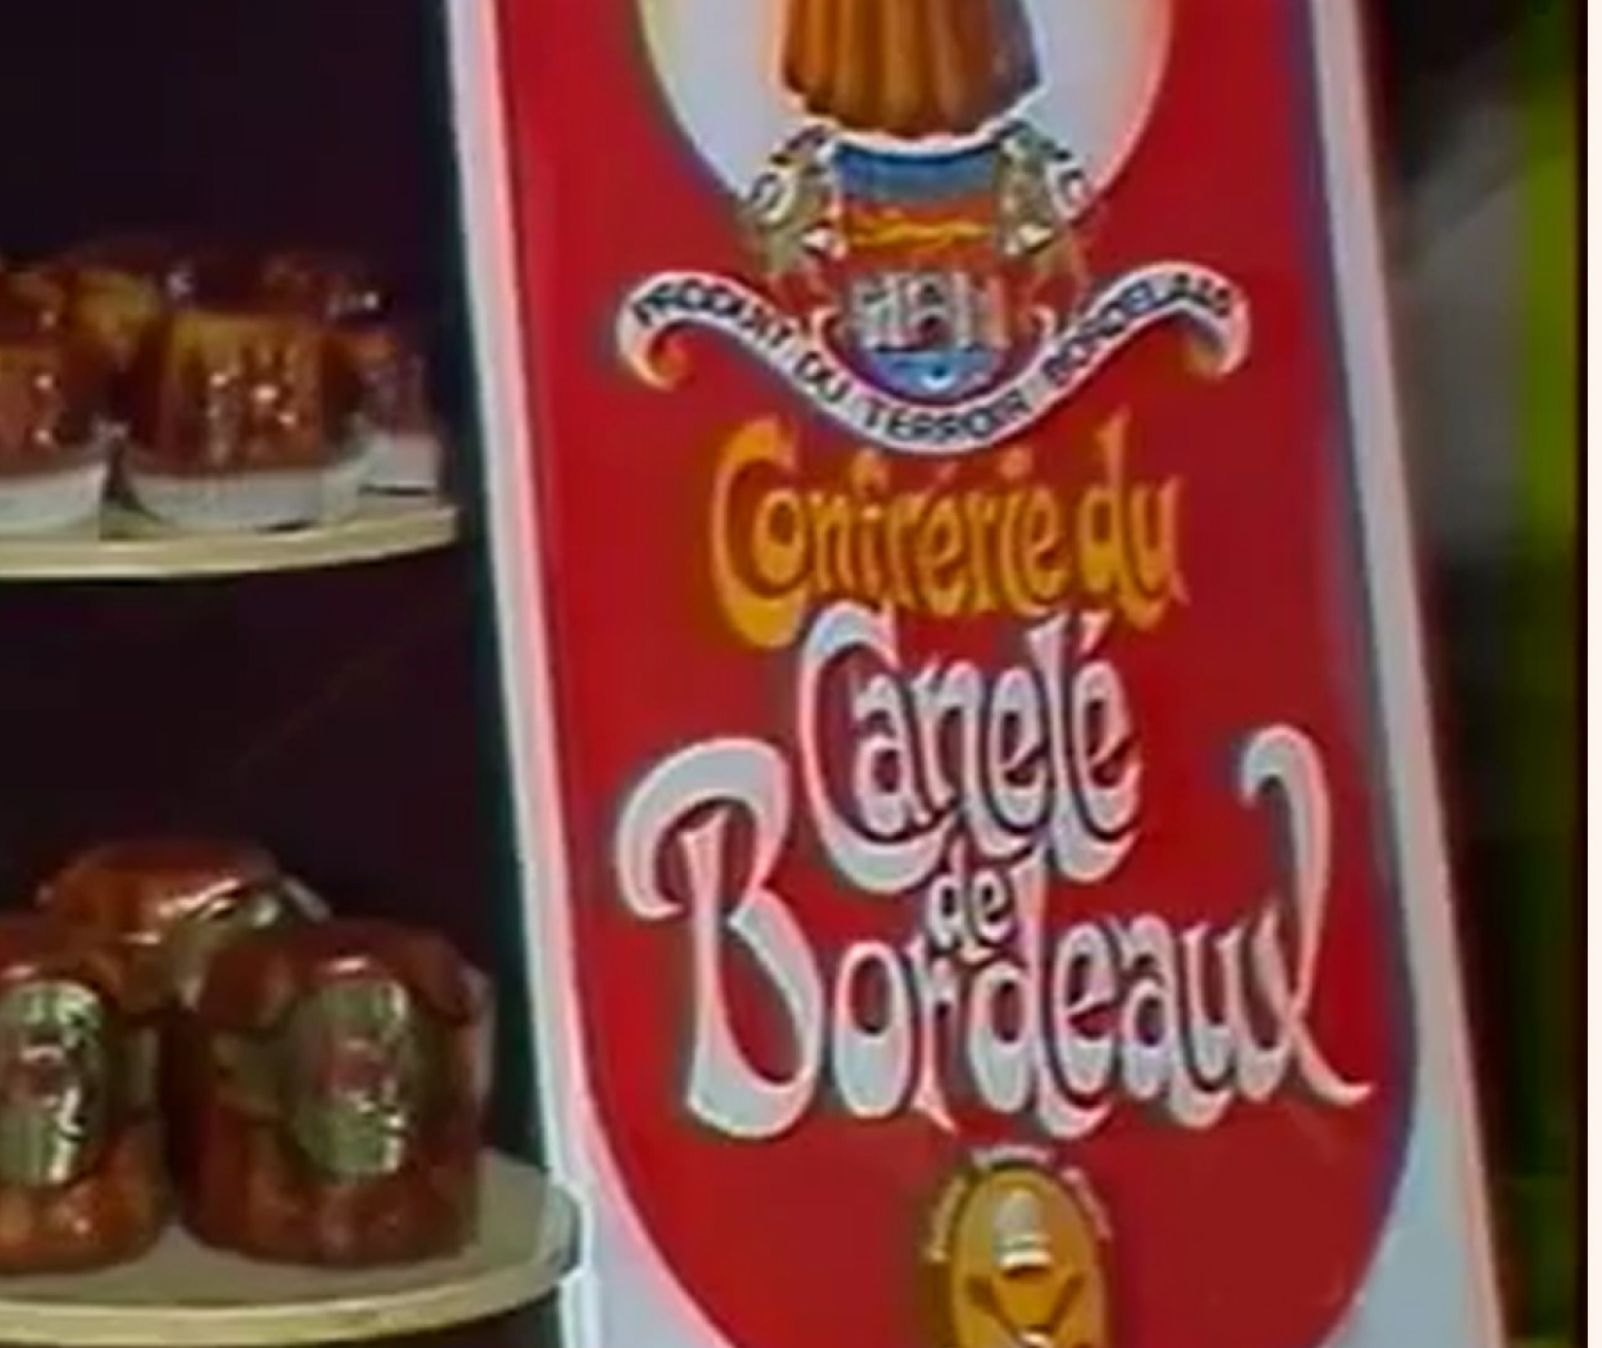 The history of Canelé